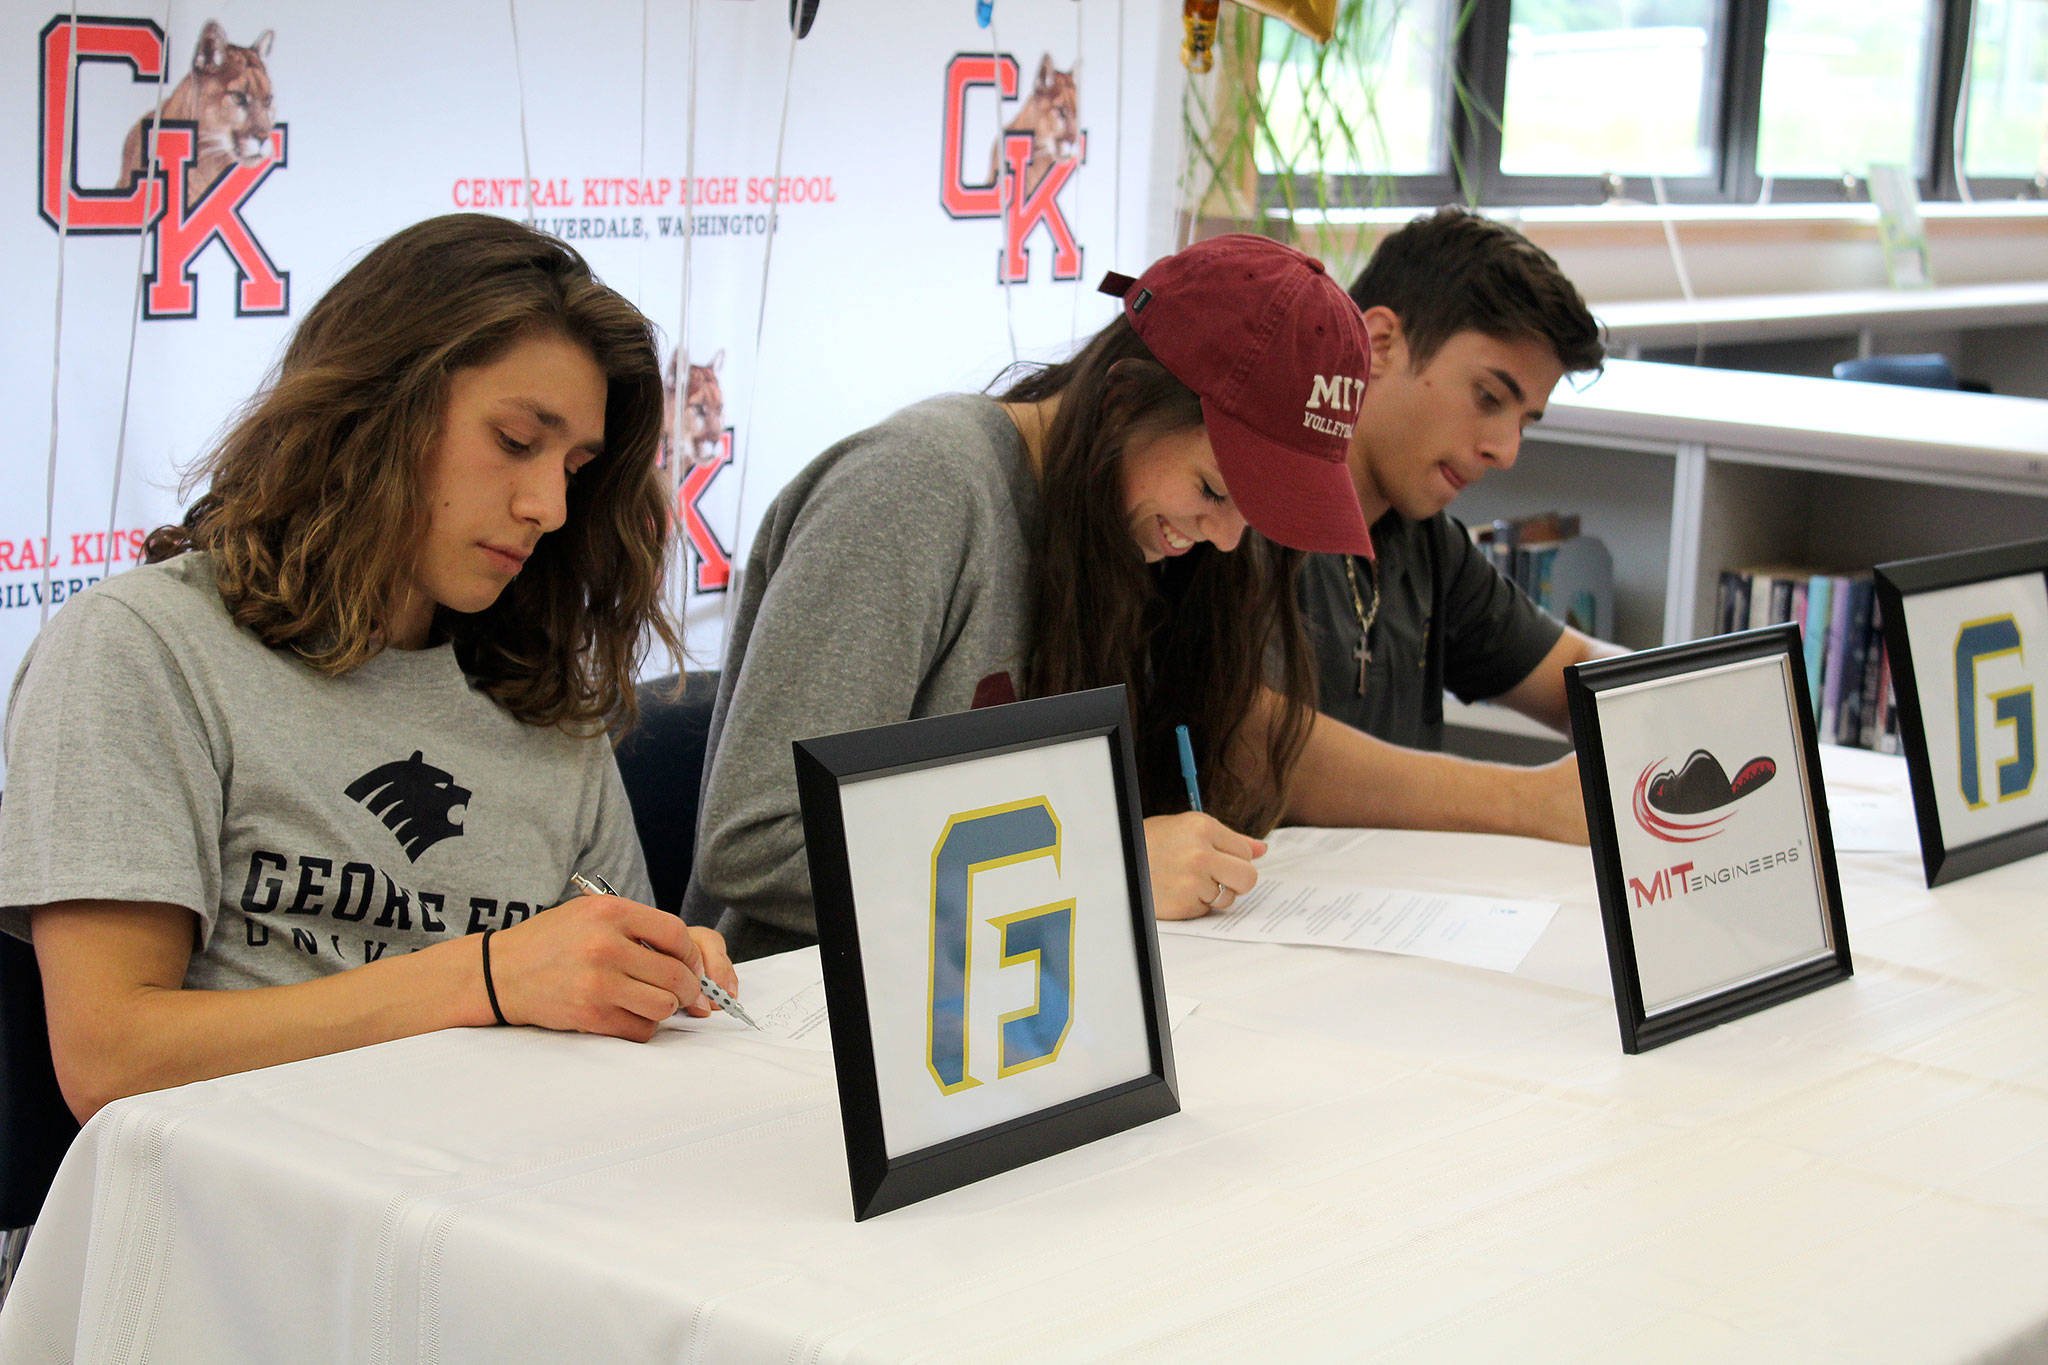 From left, Caleb Giesbrecht, Katelyn Downey and Cody Davis committed to universities May 31. Giesbrecht will be on the cross country team for George Fox University, Downey will be a volleyball player at MIT and Davis will be on the track and field team at George Fox University.                                Michelle Beahm / Kitsap News Group